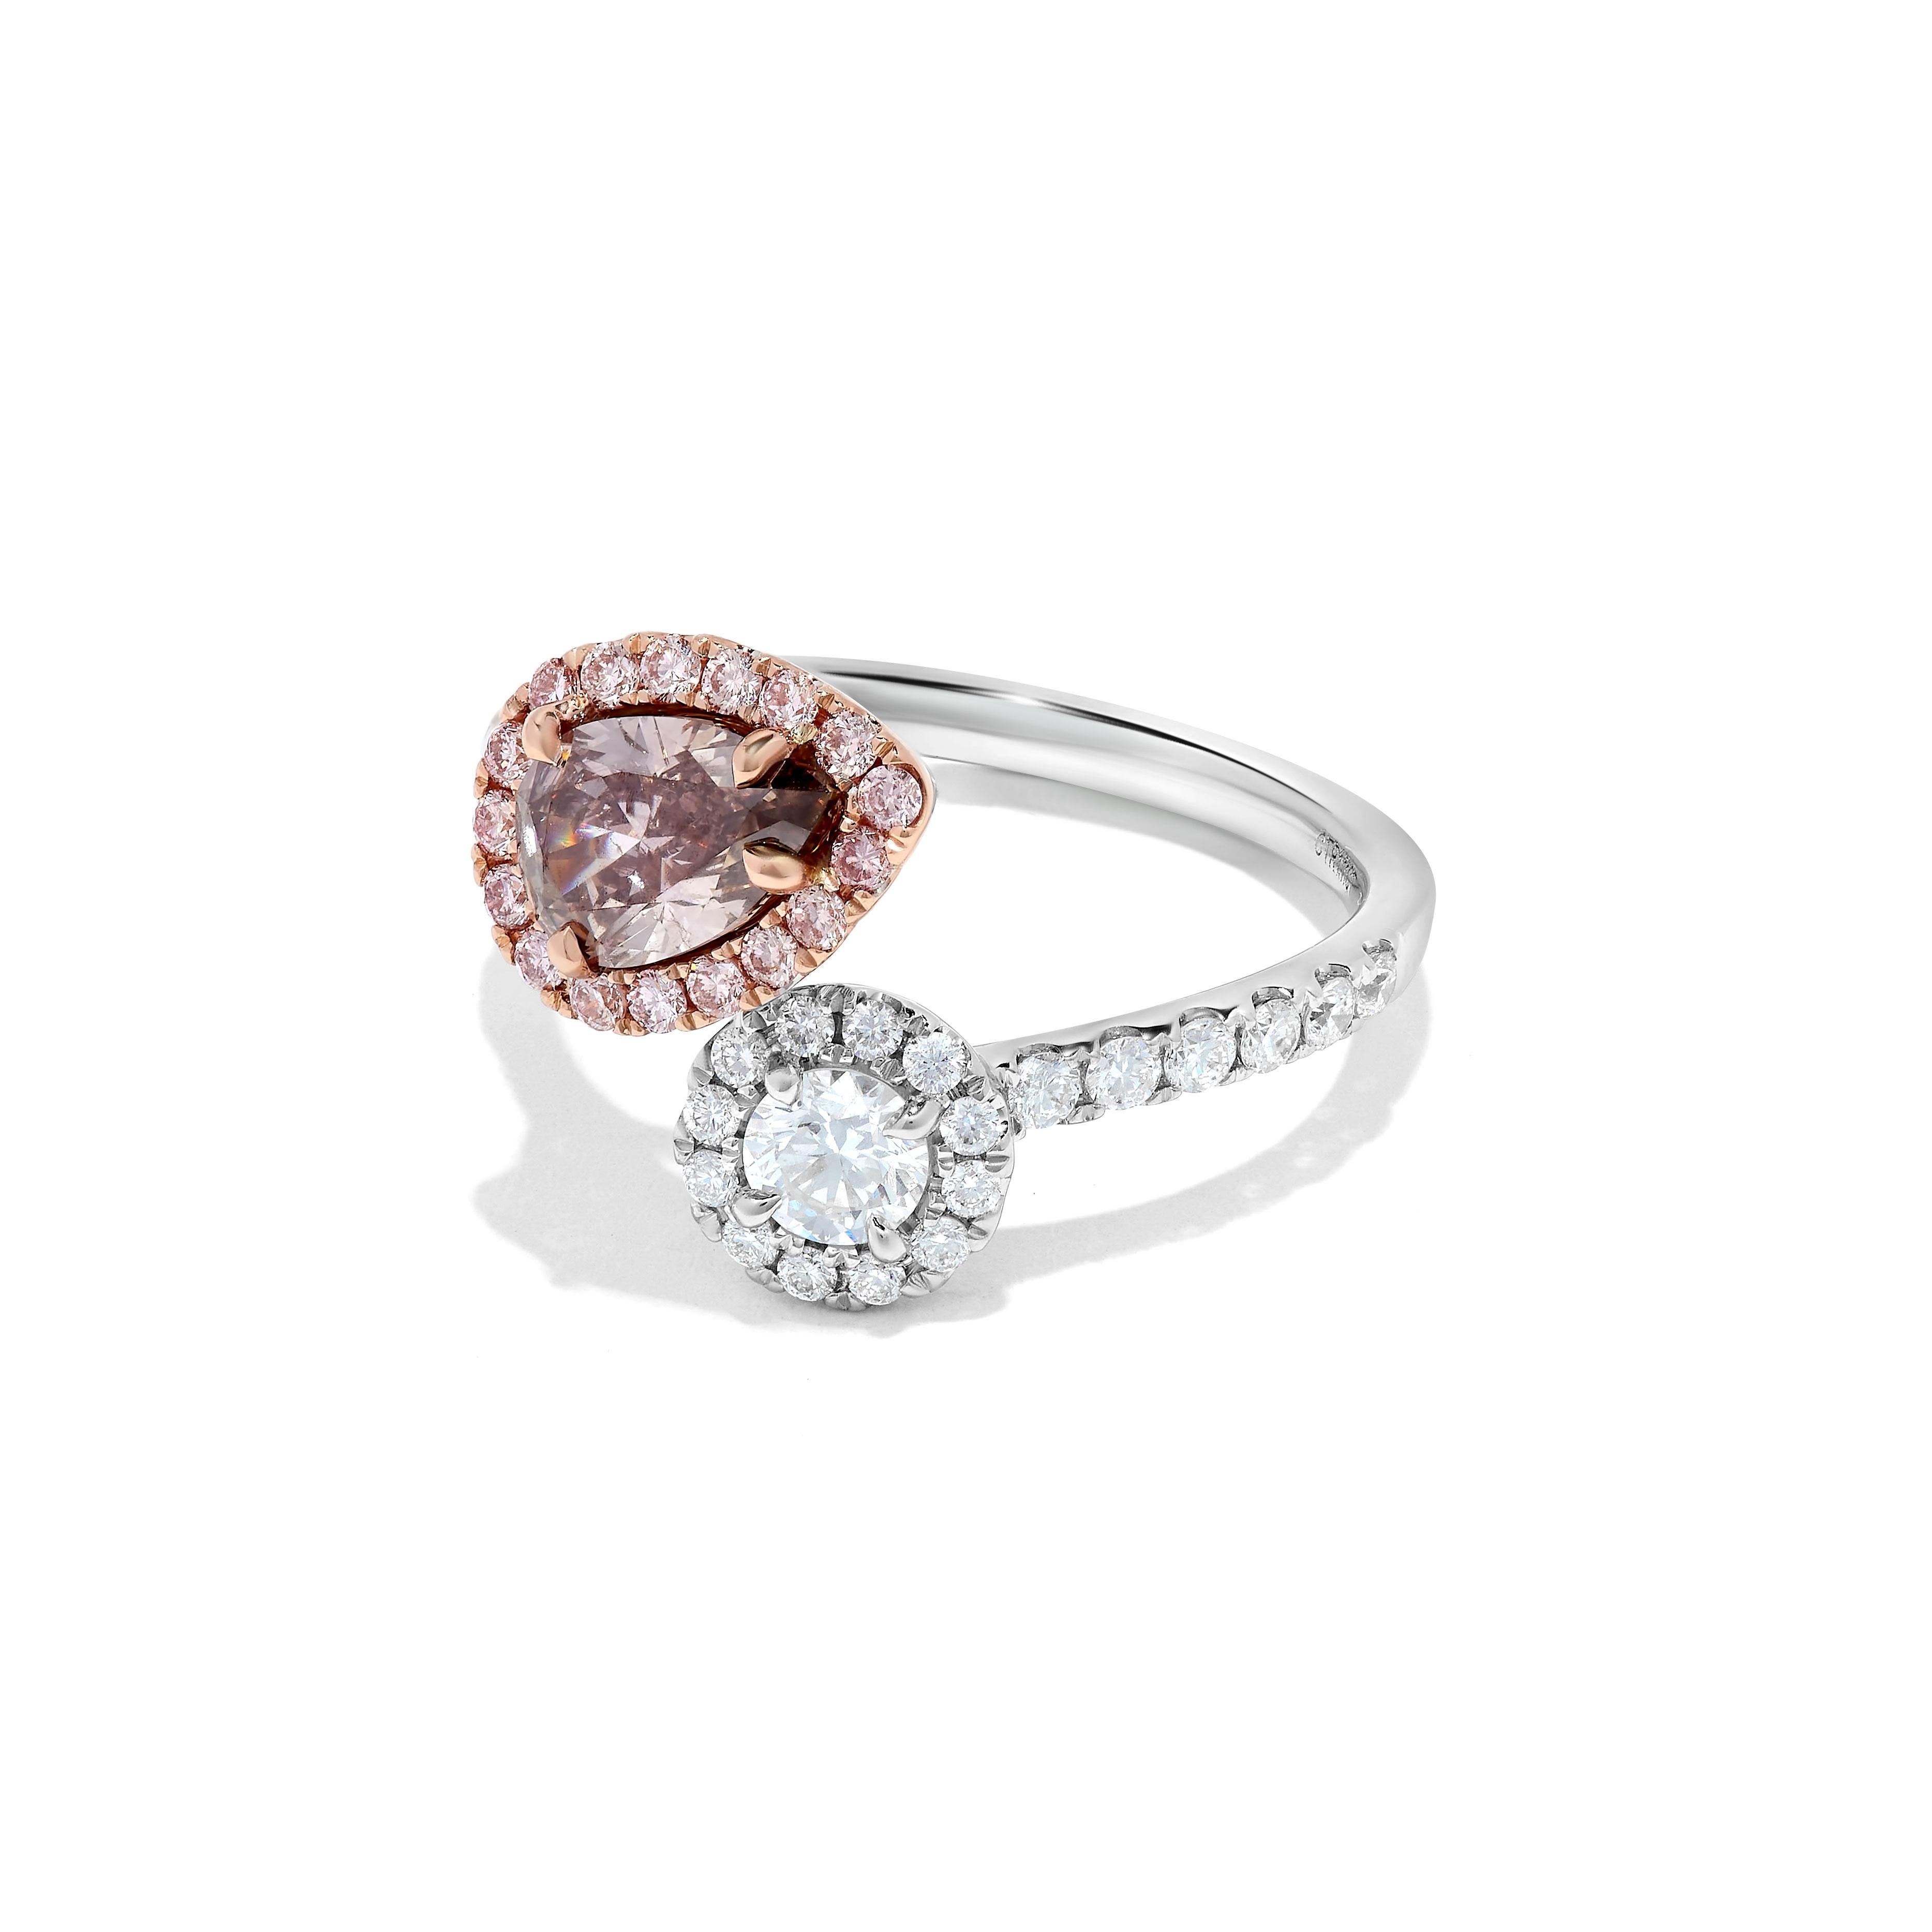 RareGemWorld's classic GIA certified diamond ring. Mounted in a beautiful 18K Rose and White Gold setting with a natural pear cut pink diamond as well as a natural round cut white diamond. These diamonds are surrounded by round natural pink diamond